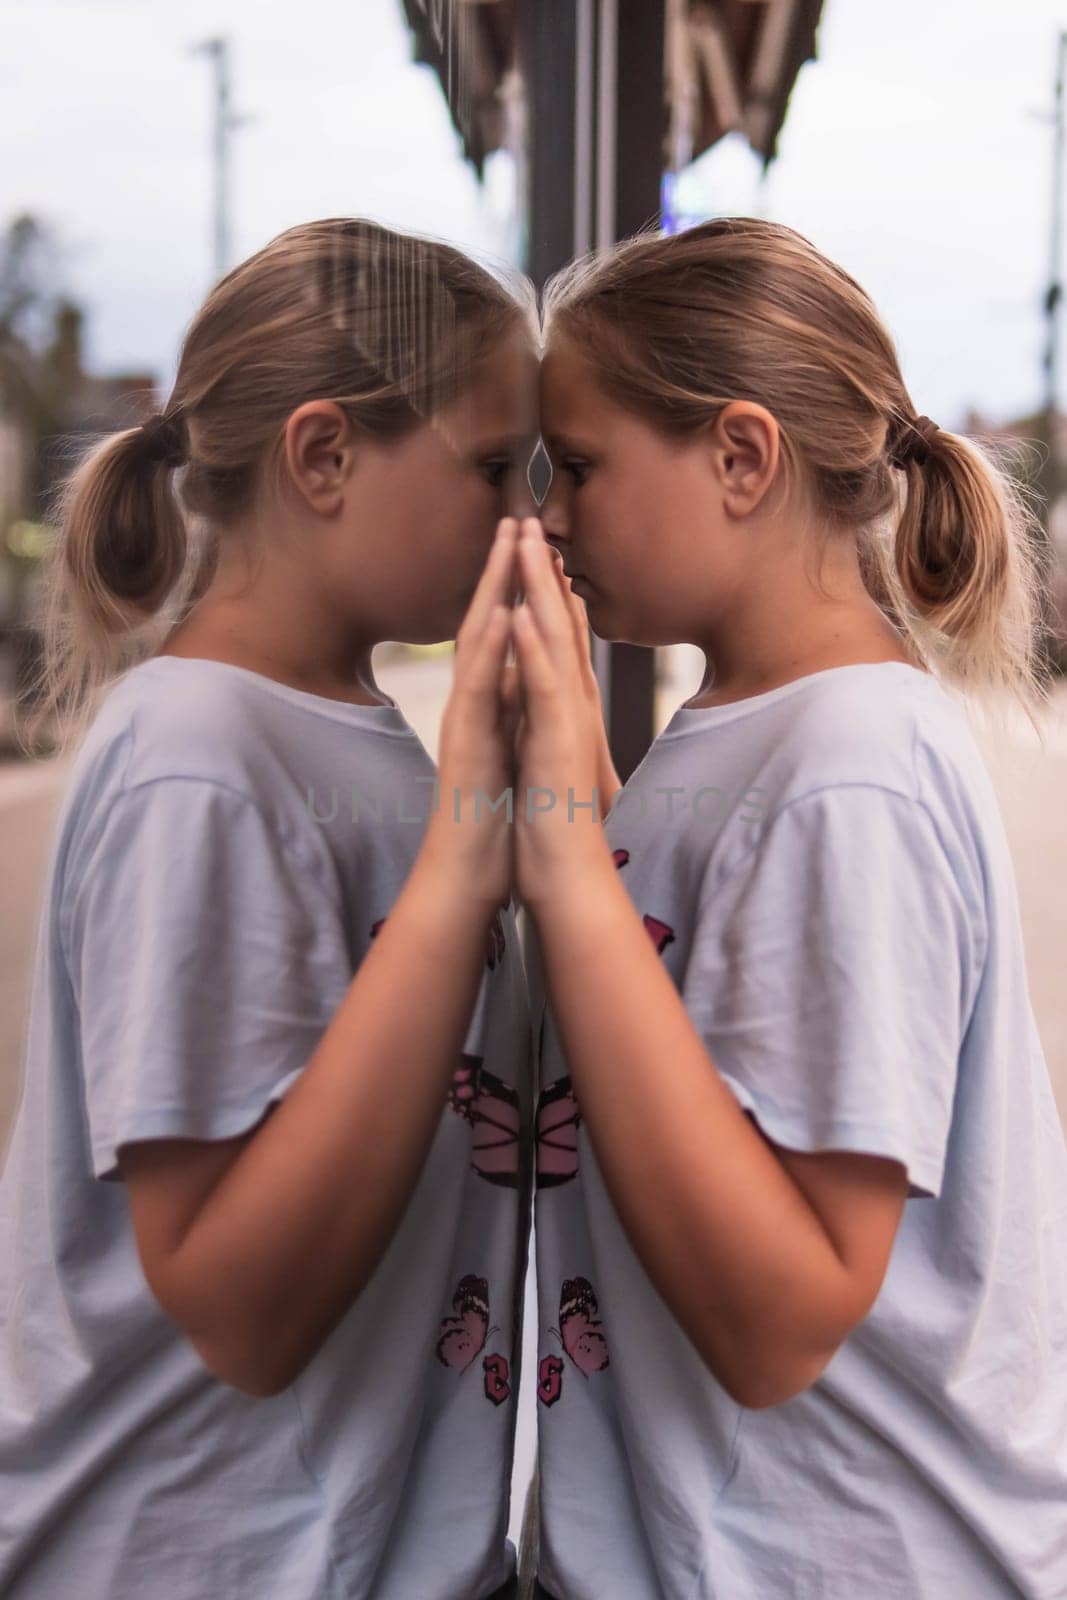 A teenager of European appearance with blond hair braided in a ponytail stands near a glass showcase and looks into it, a reflection of a girl is on the glass showcase. High quality photo